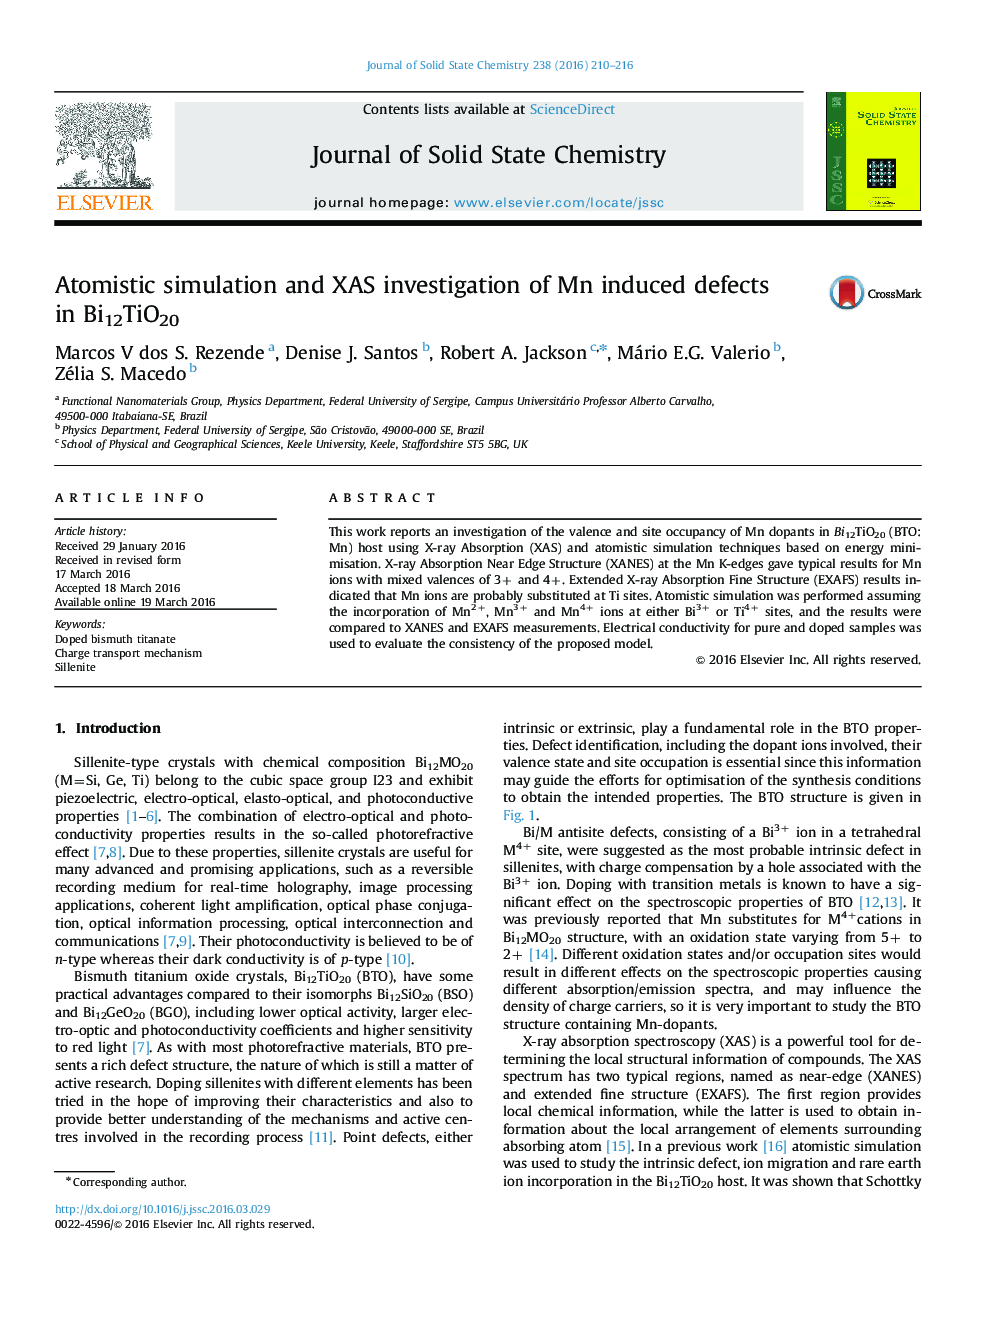 Atomistic simulation and XAS investigation of Mn induced defects in Bi12TiO20